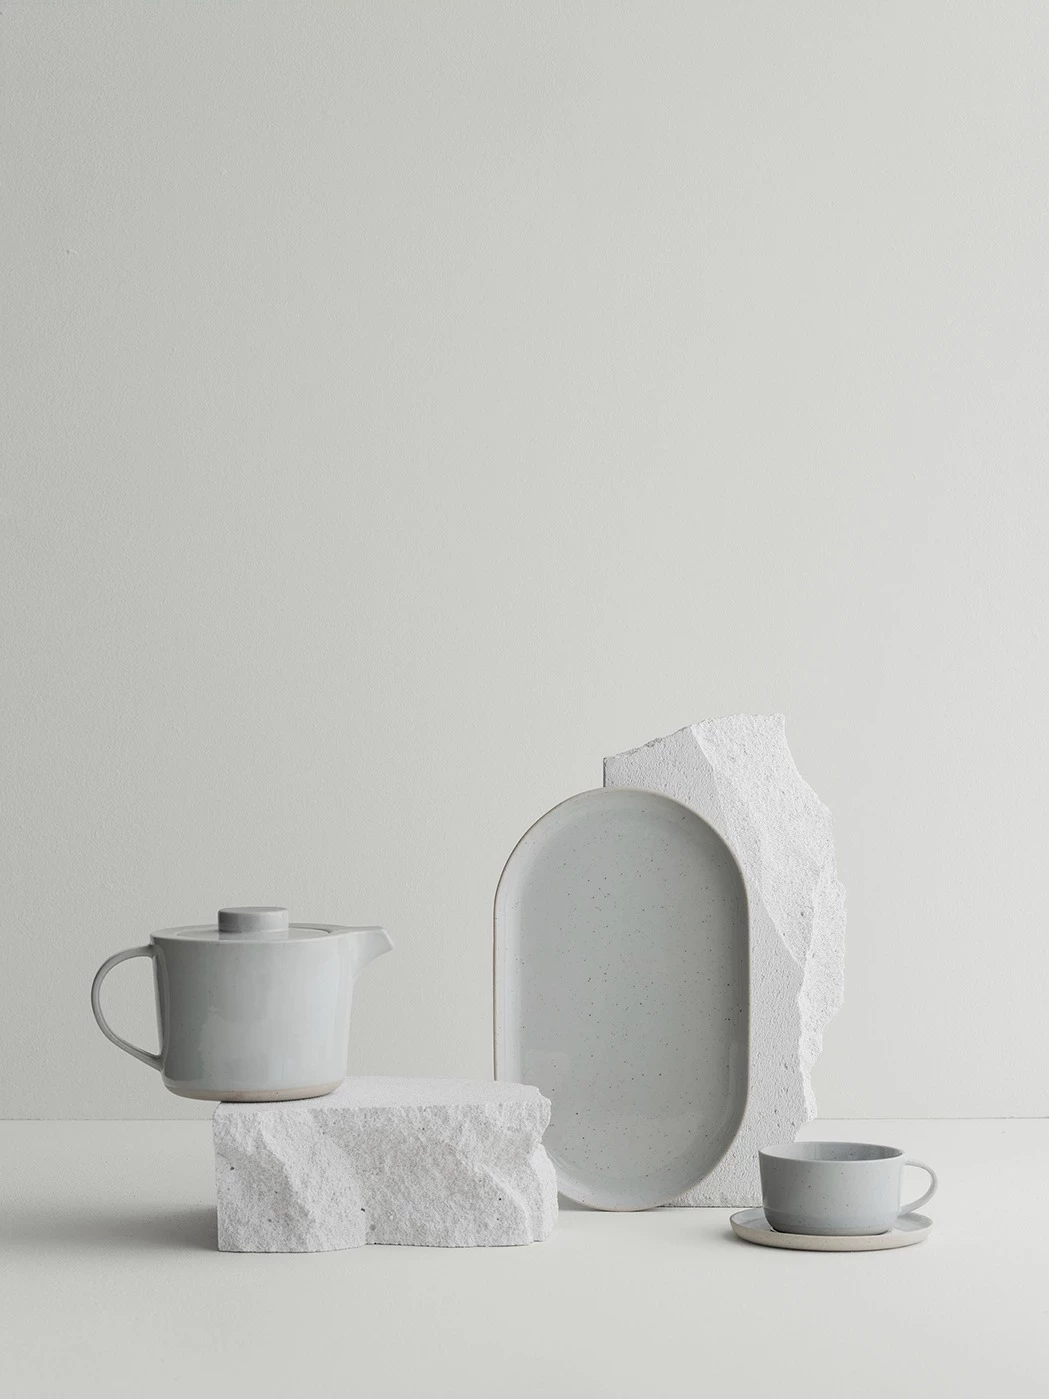 Tea pot, dishes & coffee mugs with salt and pepper shaker